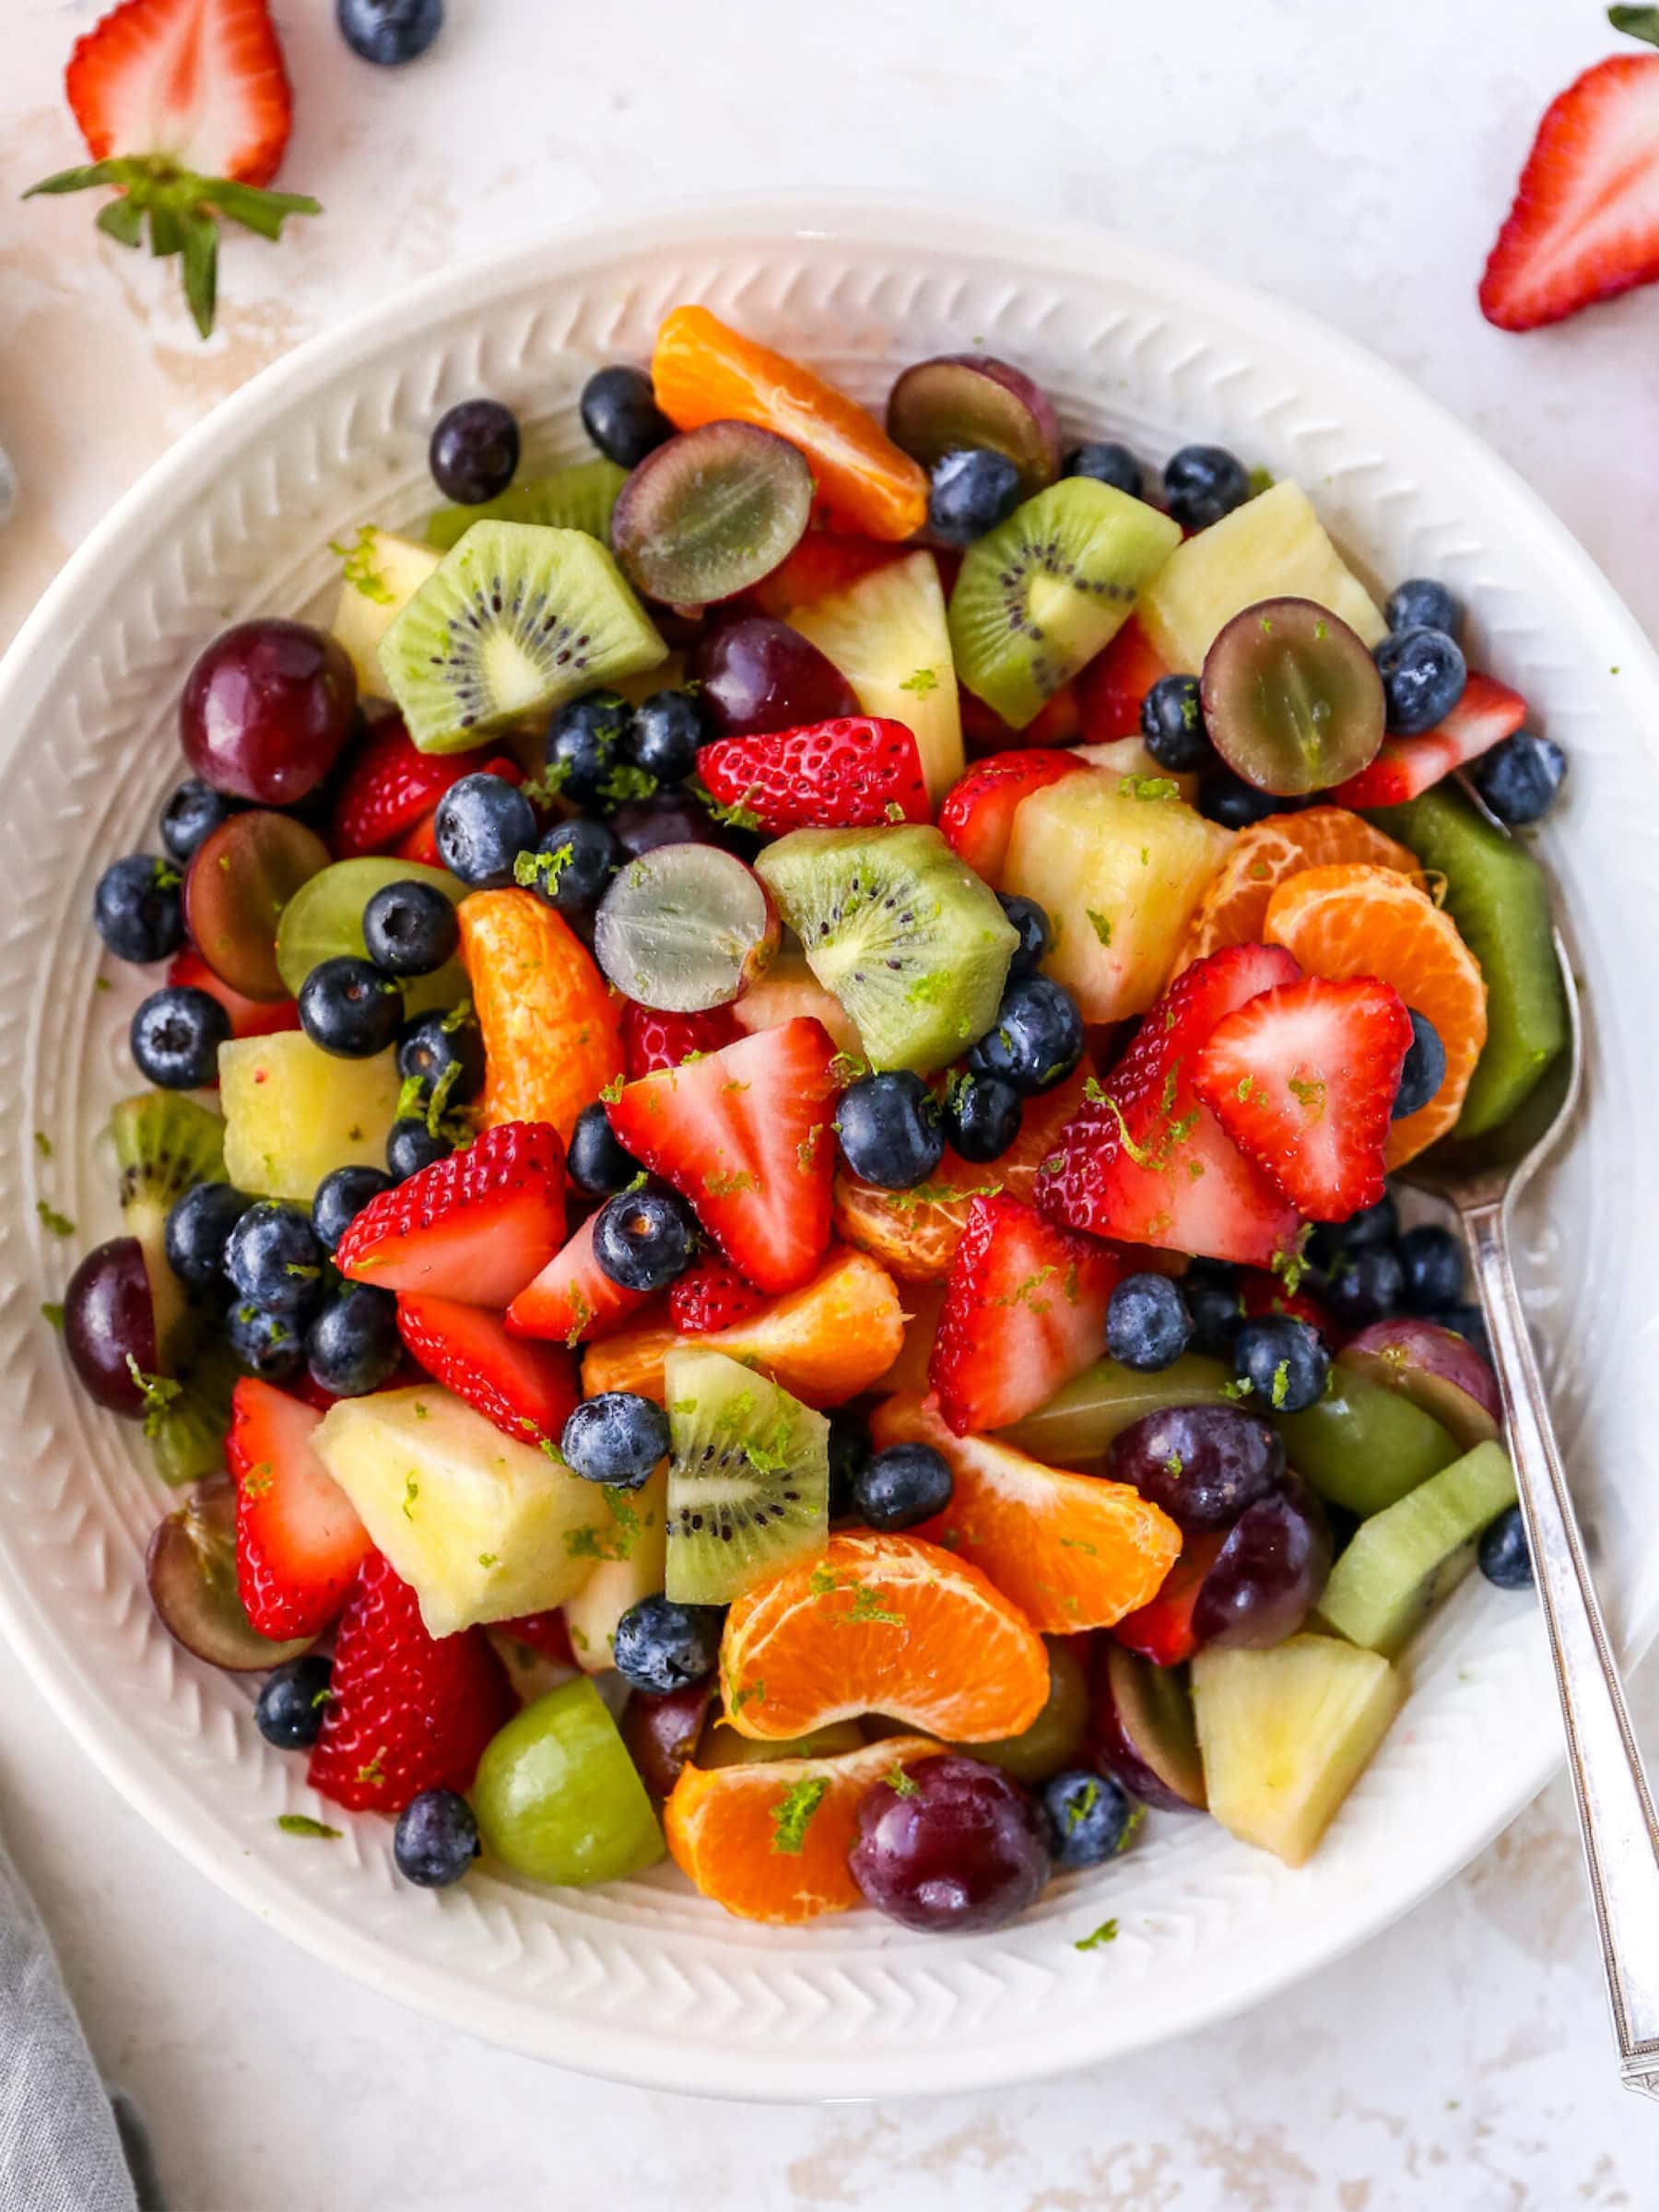 Bowl of fruit salad with strawberries, clementines, kiwi, grapes, blueberries and pineapple. Fruit salad is topped with lime zest. Bowl has a serving spoon in it. To the side of the bowl is a cloth napkin and more strawberries and blueberries.